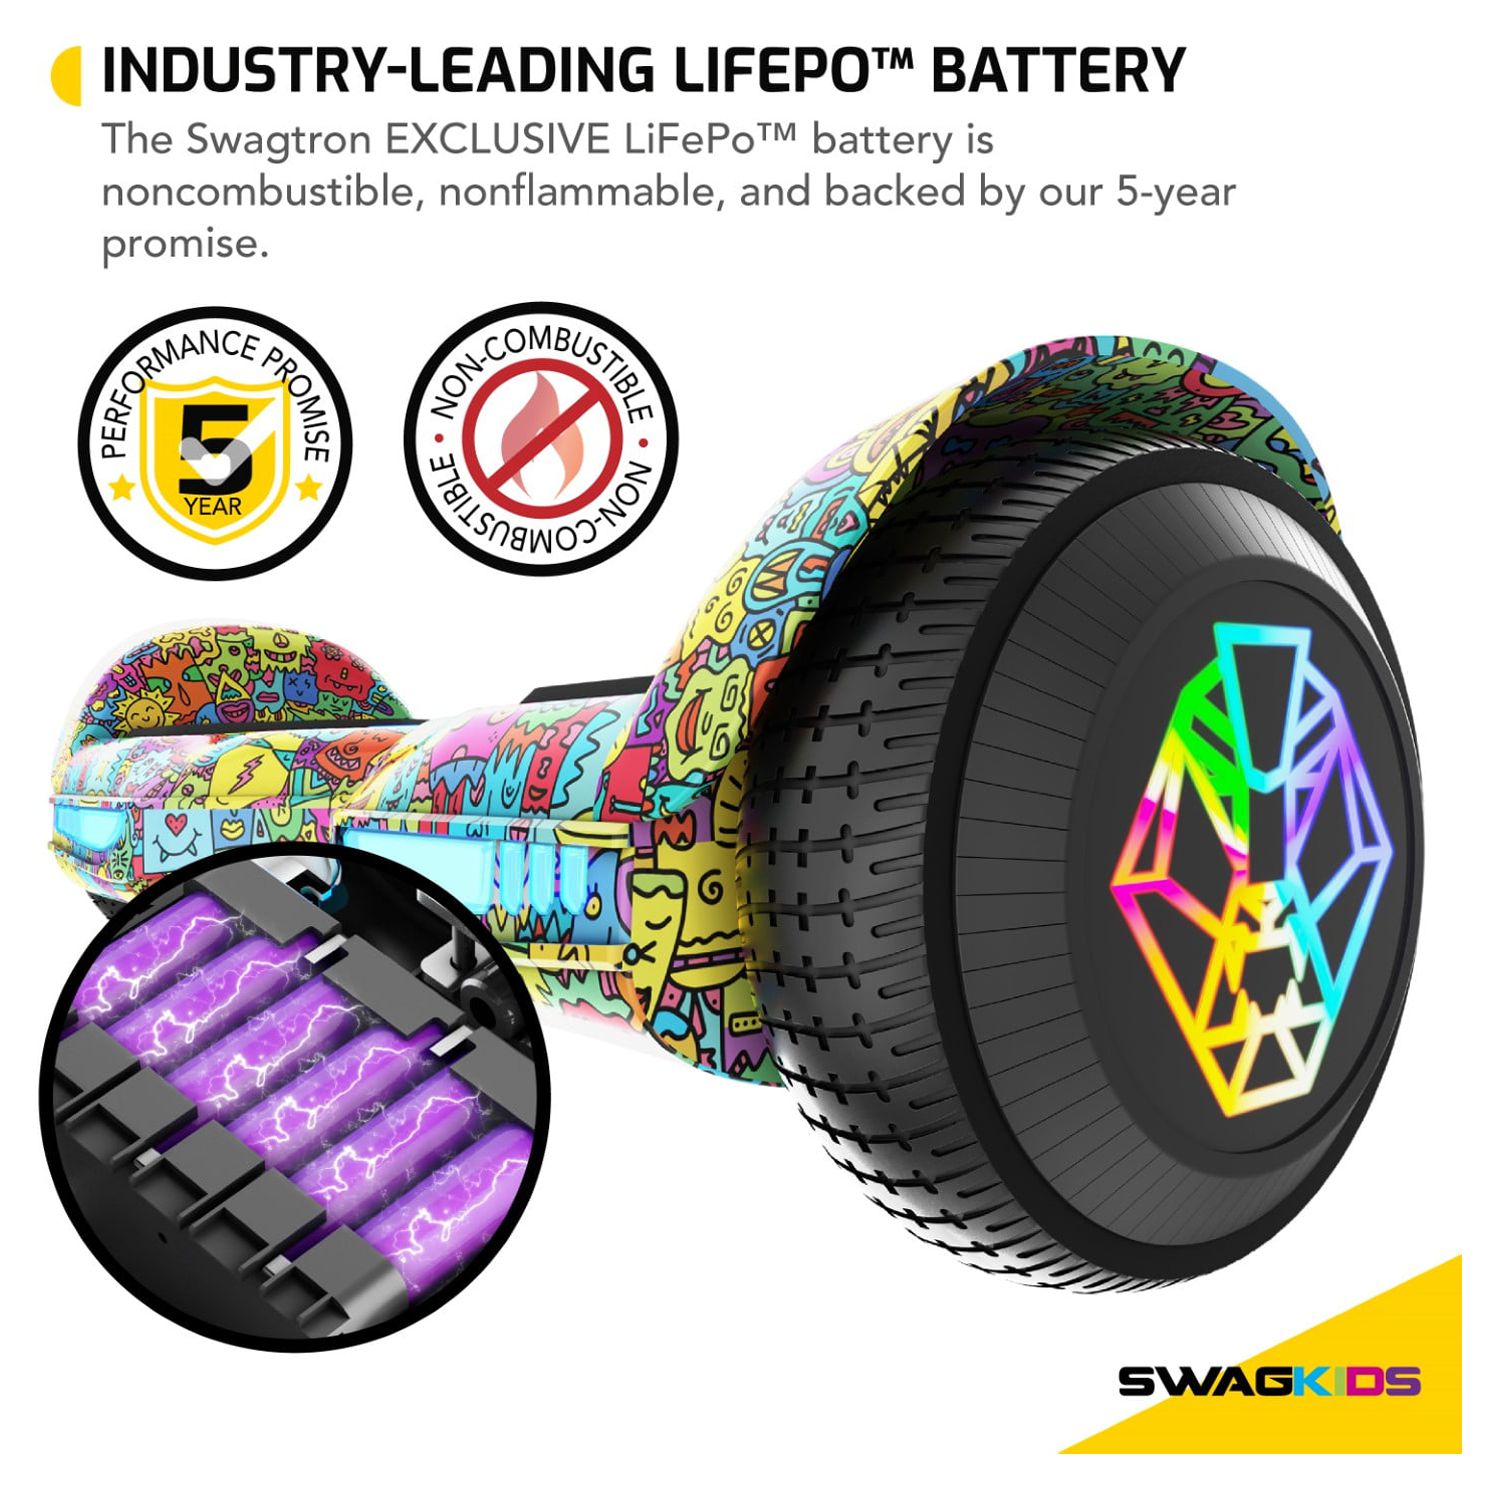 Swagtron Multicolor SwagBOARD EVO Freestyle Hoverboard Bluetooth Speaker Light-Up Wheels, 7 MPH Max Speed - image 5 of 9